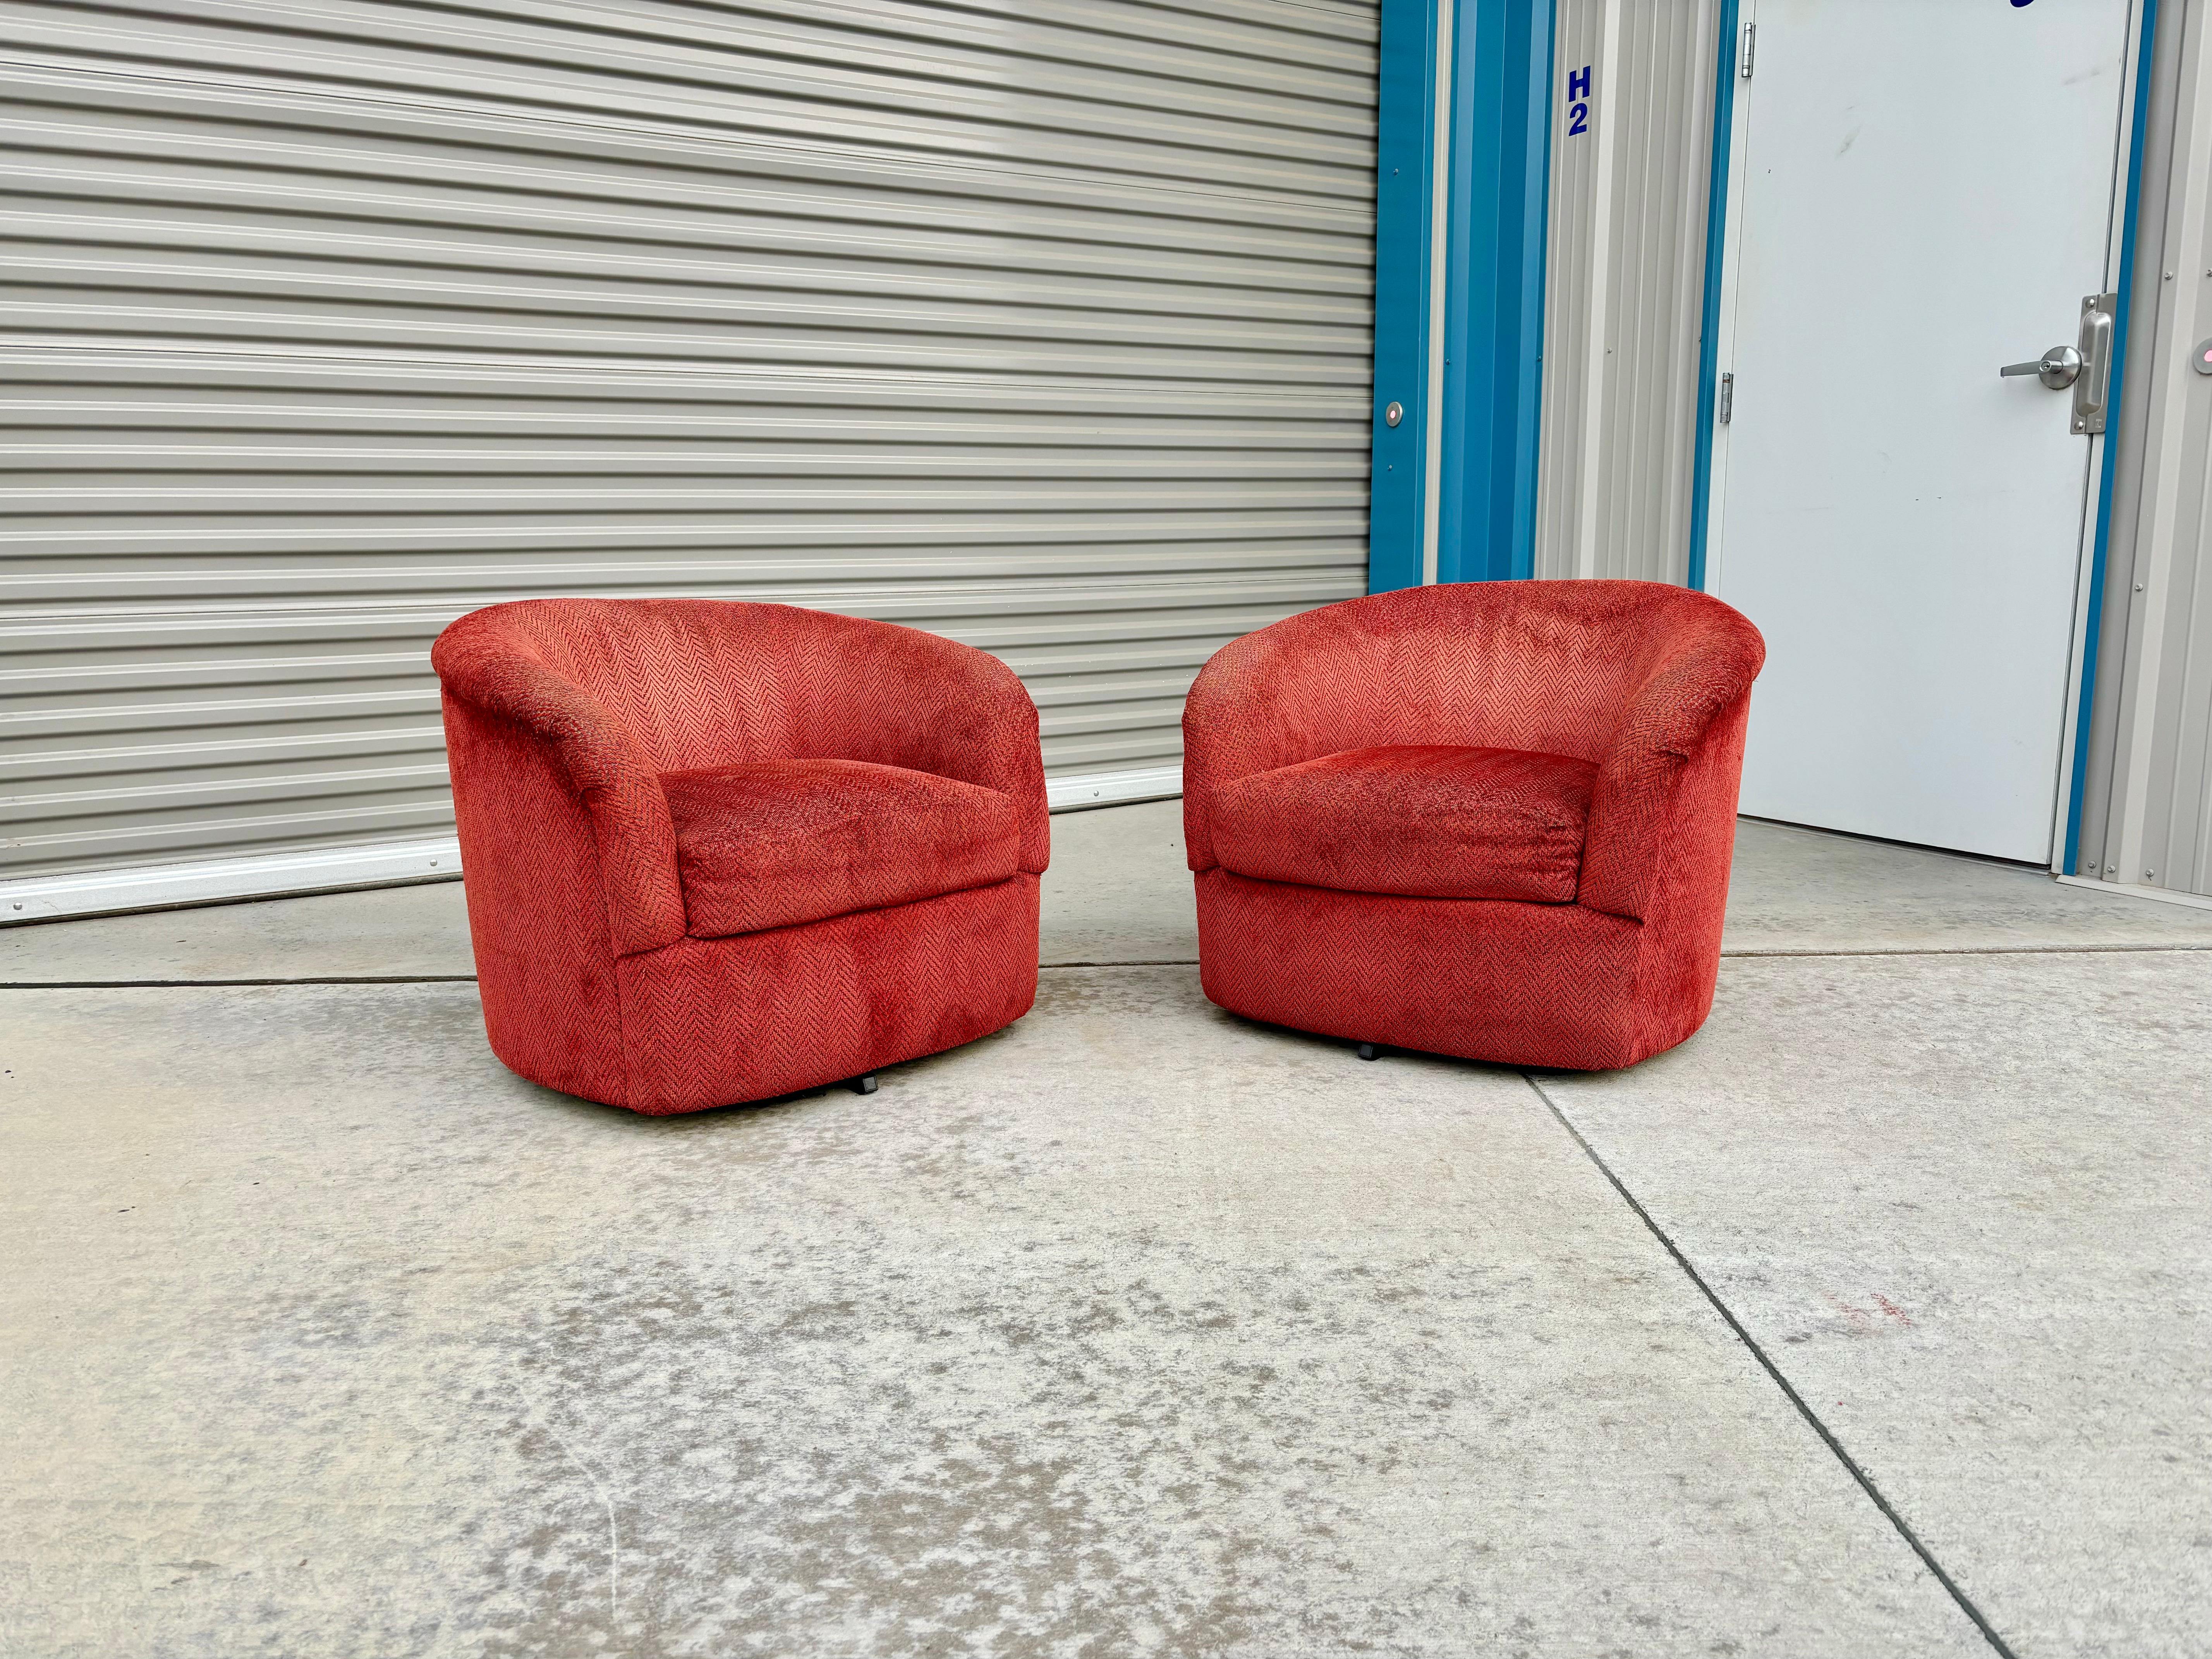 Mid-century swivel barrel chairs designed and manufactured in the United States circa 1960s. These beautiful lounge chairs have a red upholstery swivel base that rotates 360 degrees. These swivel chairs are guaranteed to draw attention, the perfect